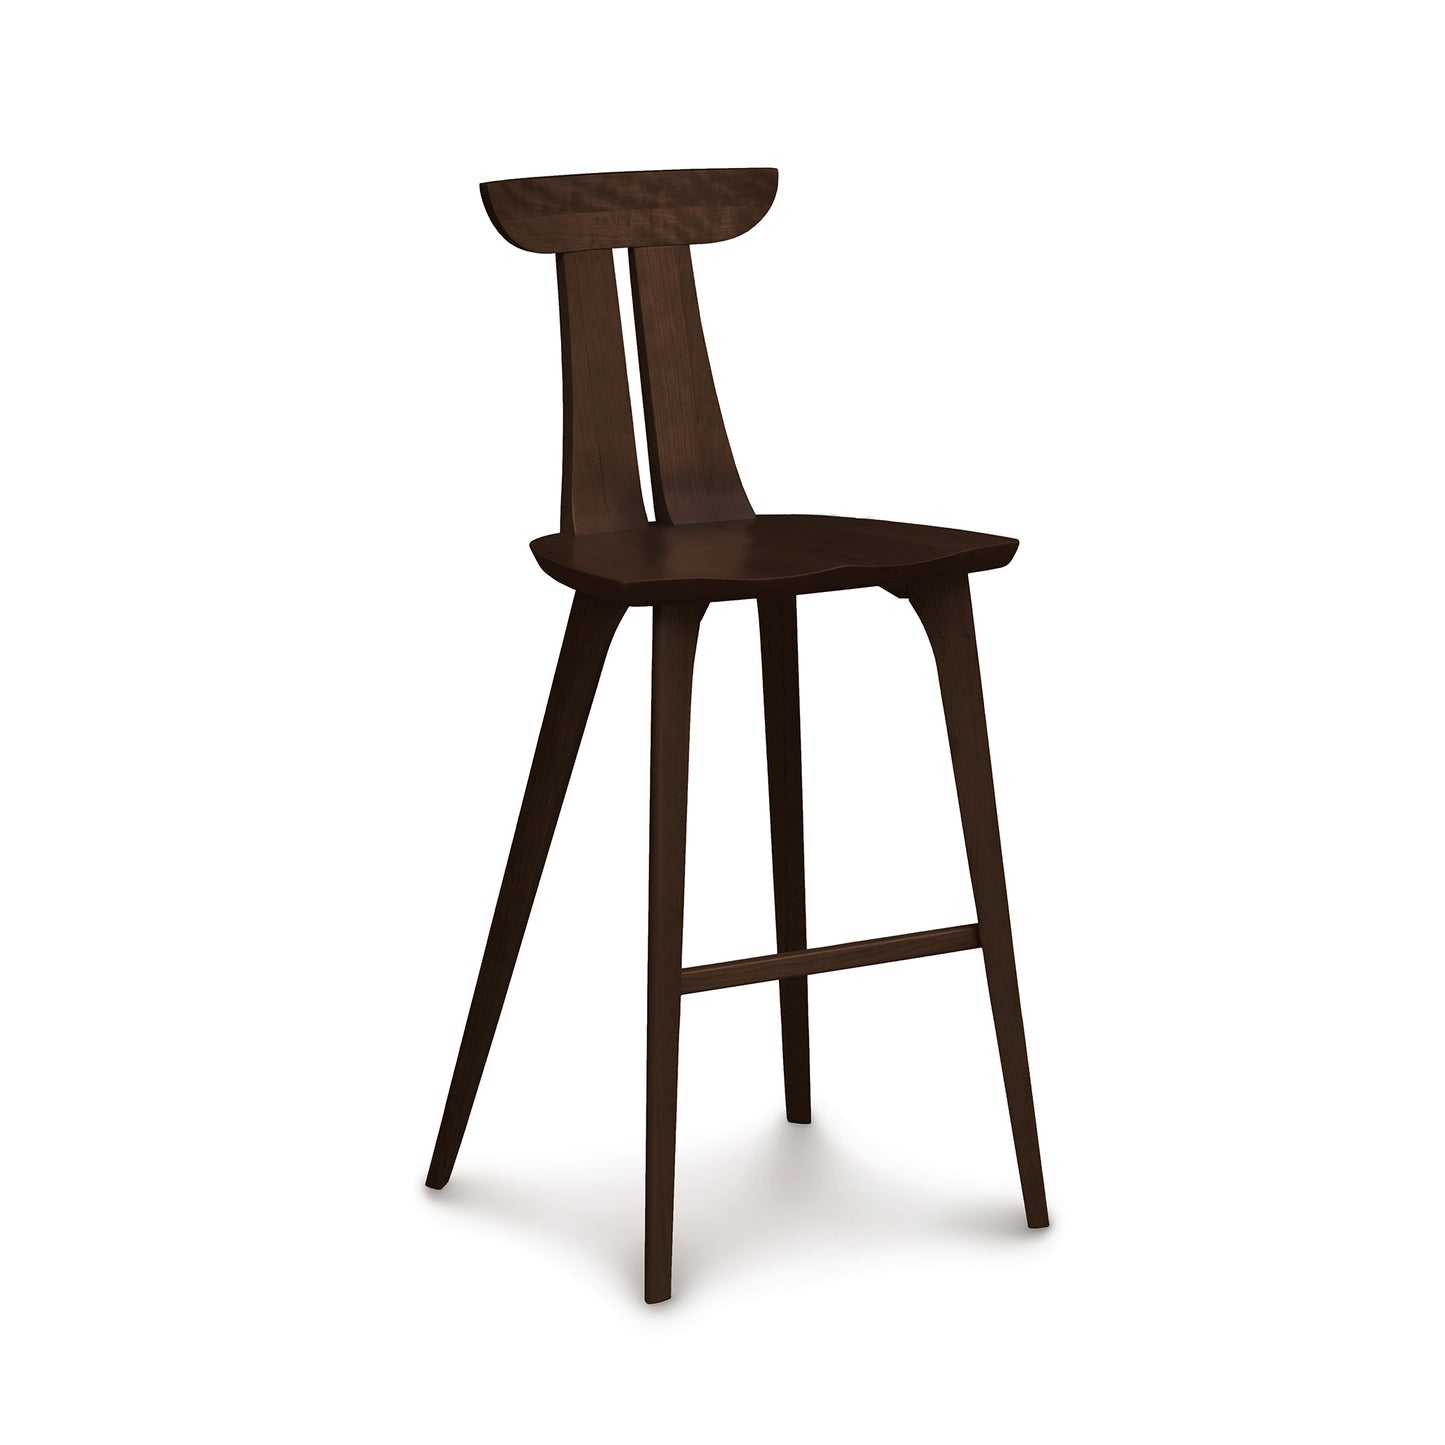 A dark brown solid American hardwood Estelle Bar Stool from Copeland Furniture against a white background.